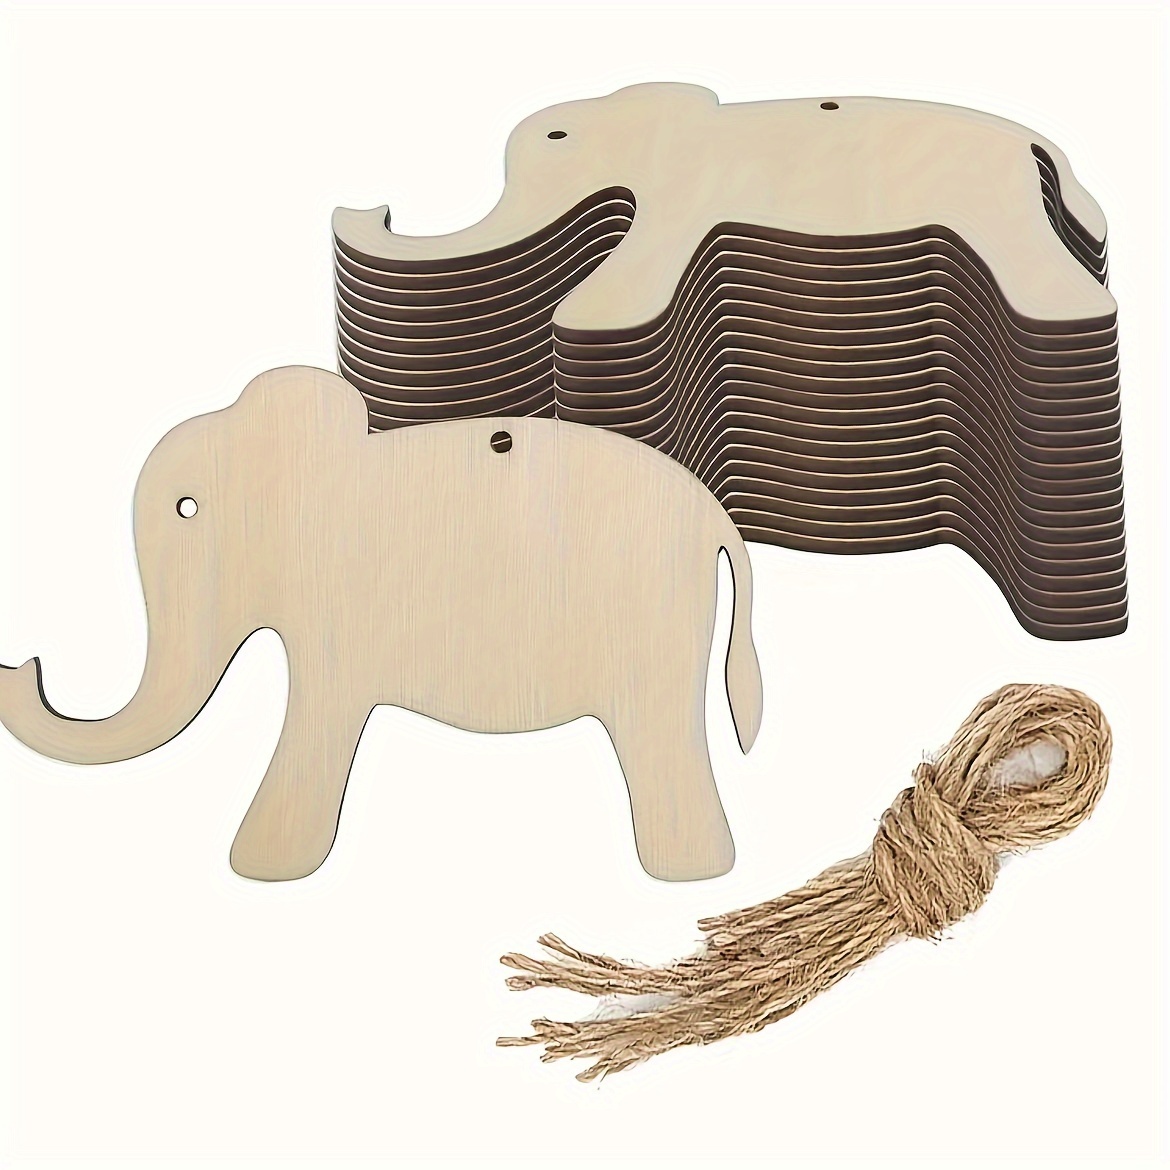 

20pcs Wooden Elephant Forest Animal Home Decoration Party Decorations.